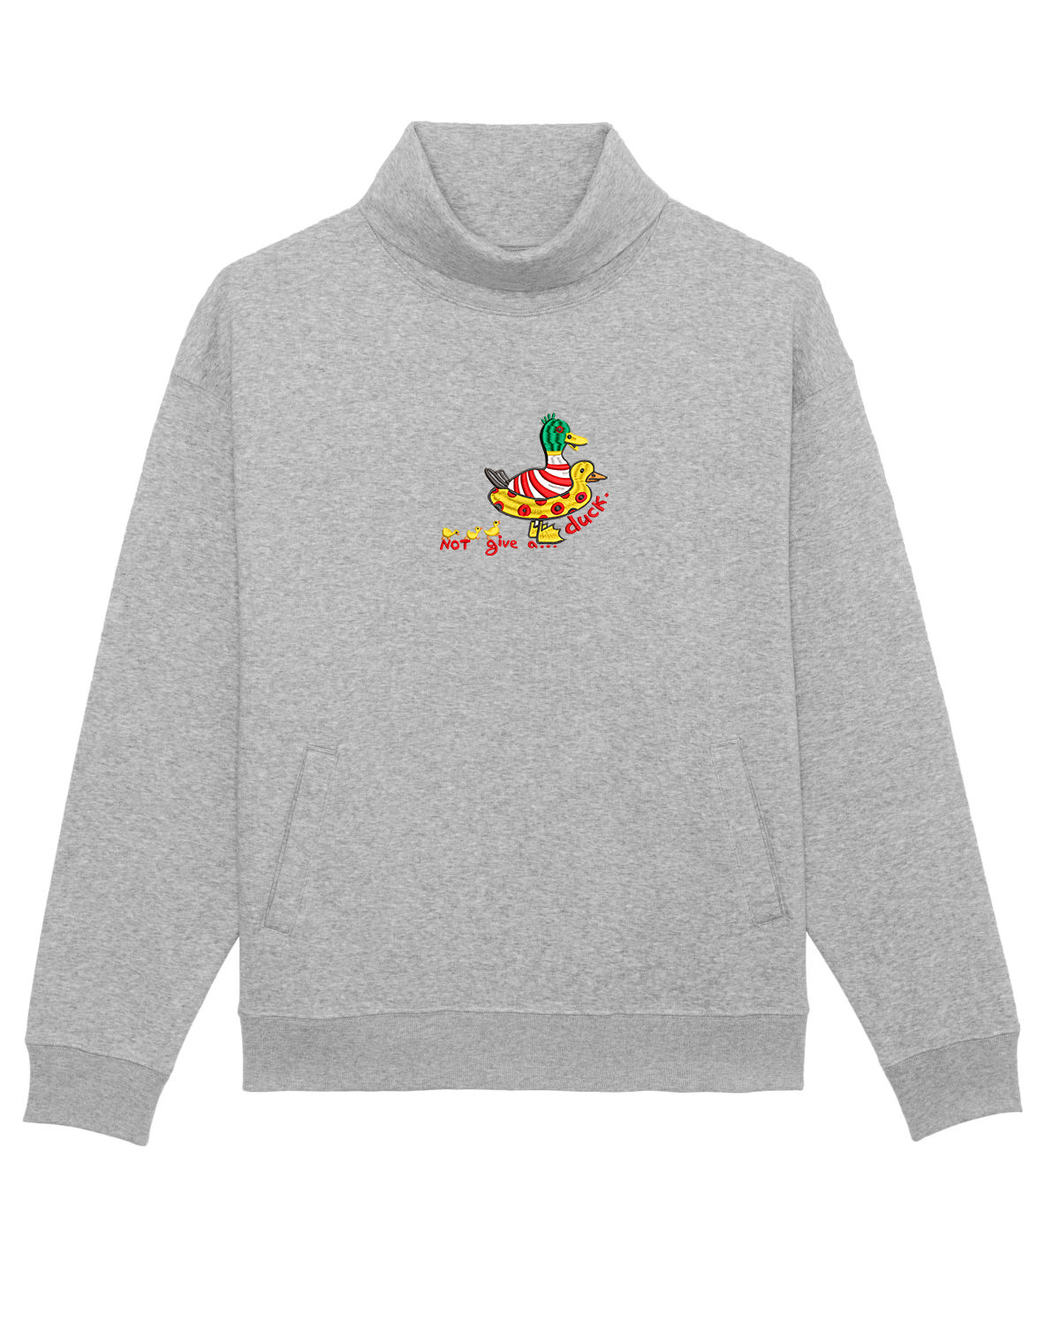 Not give a...duck. 🦆 Embroidered UNISEX sweatshirt